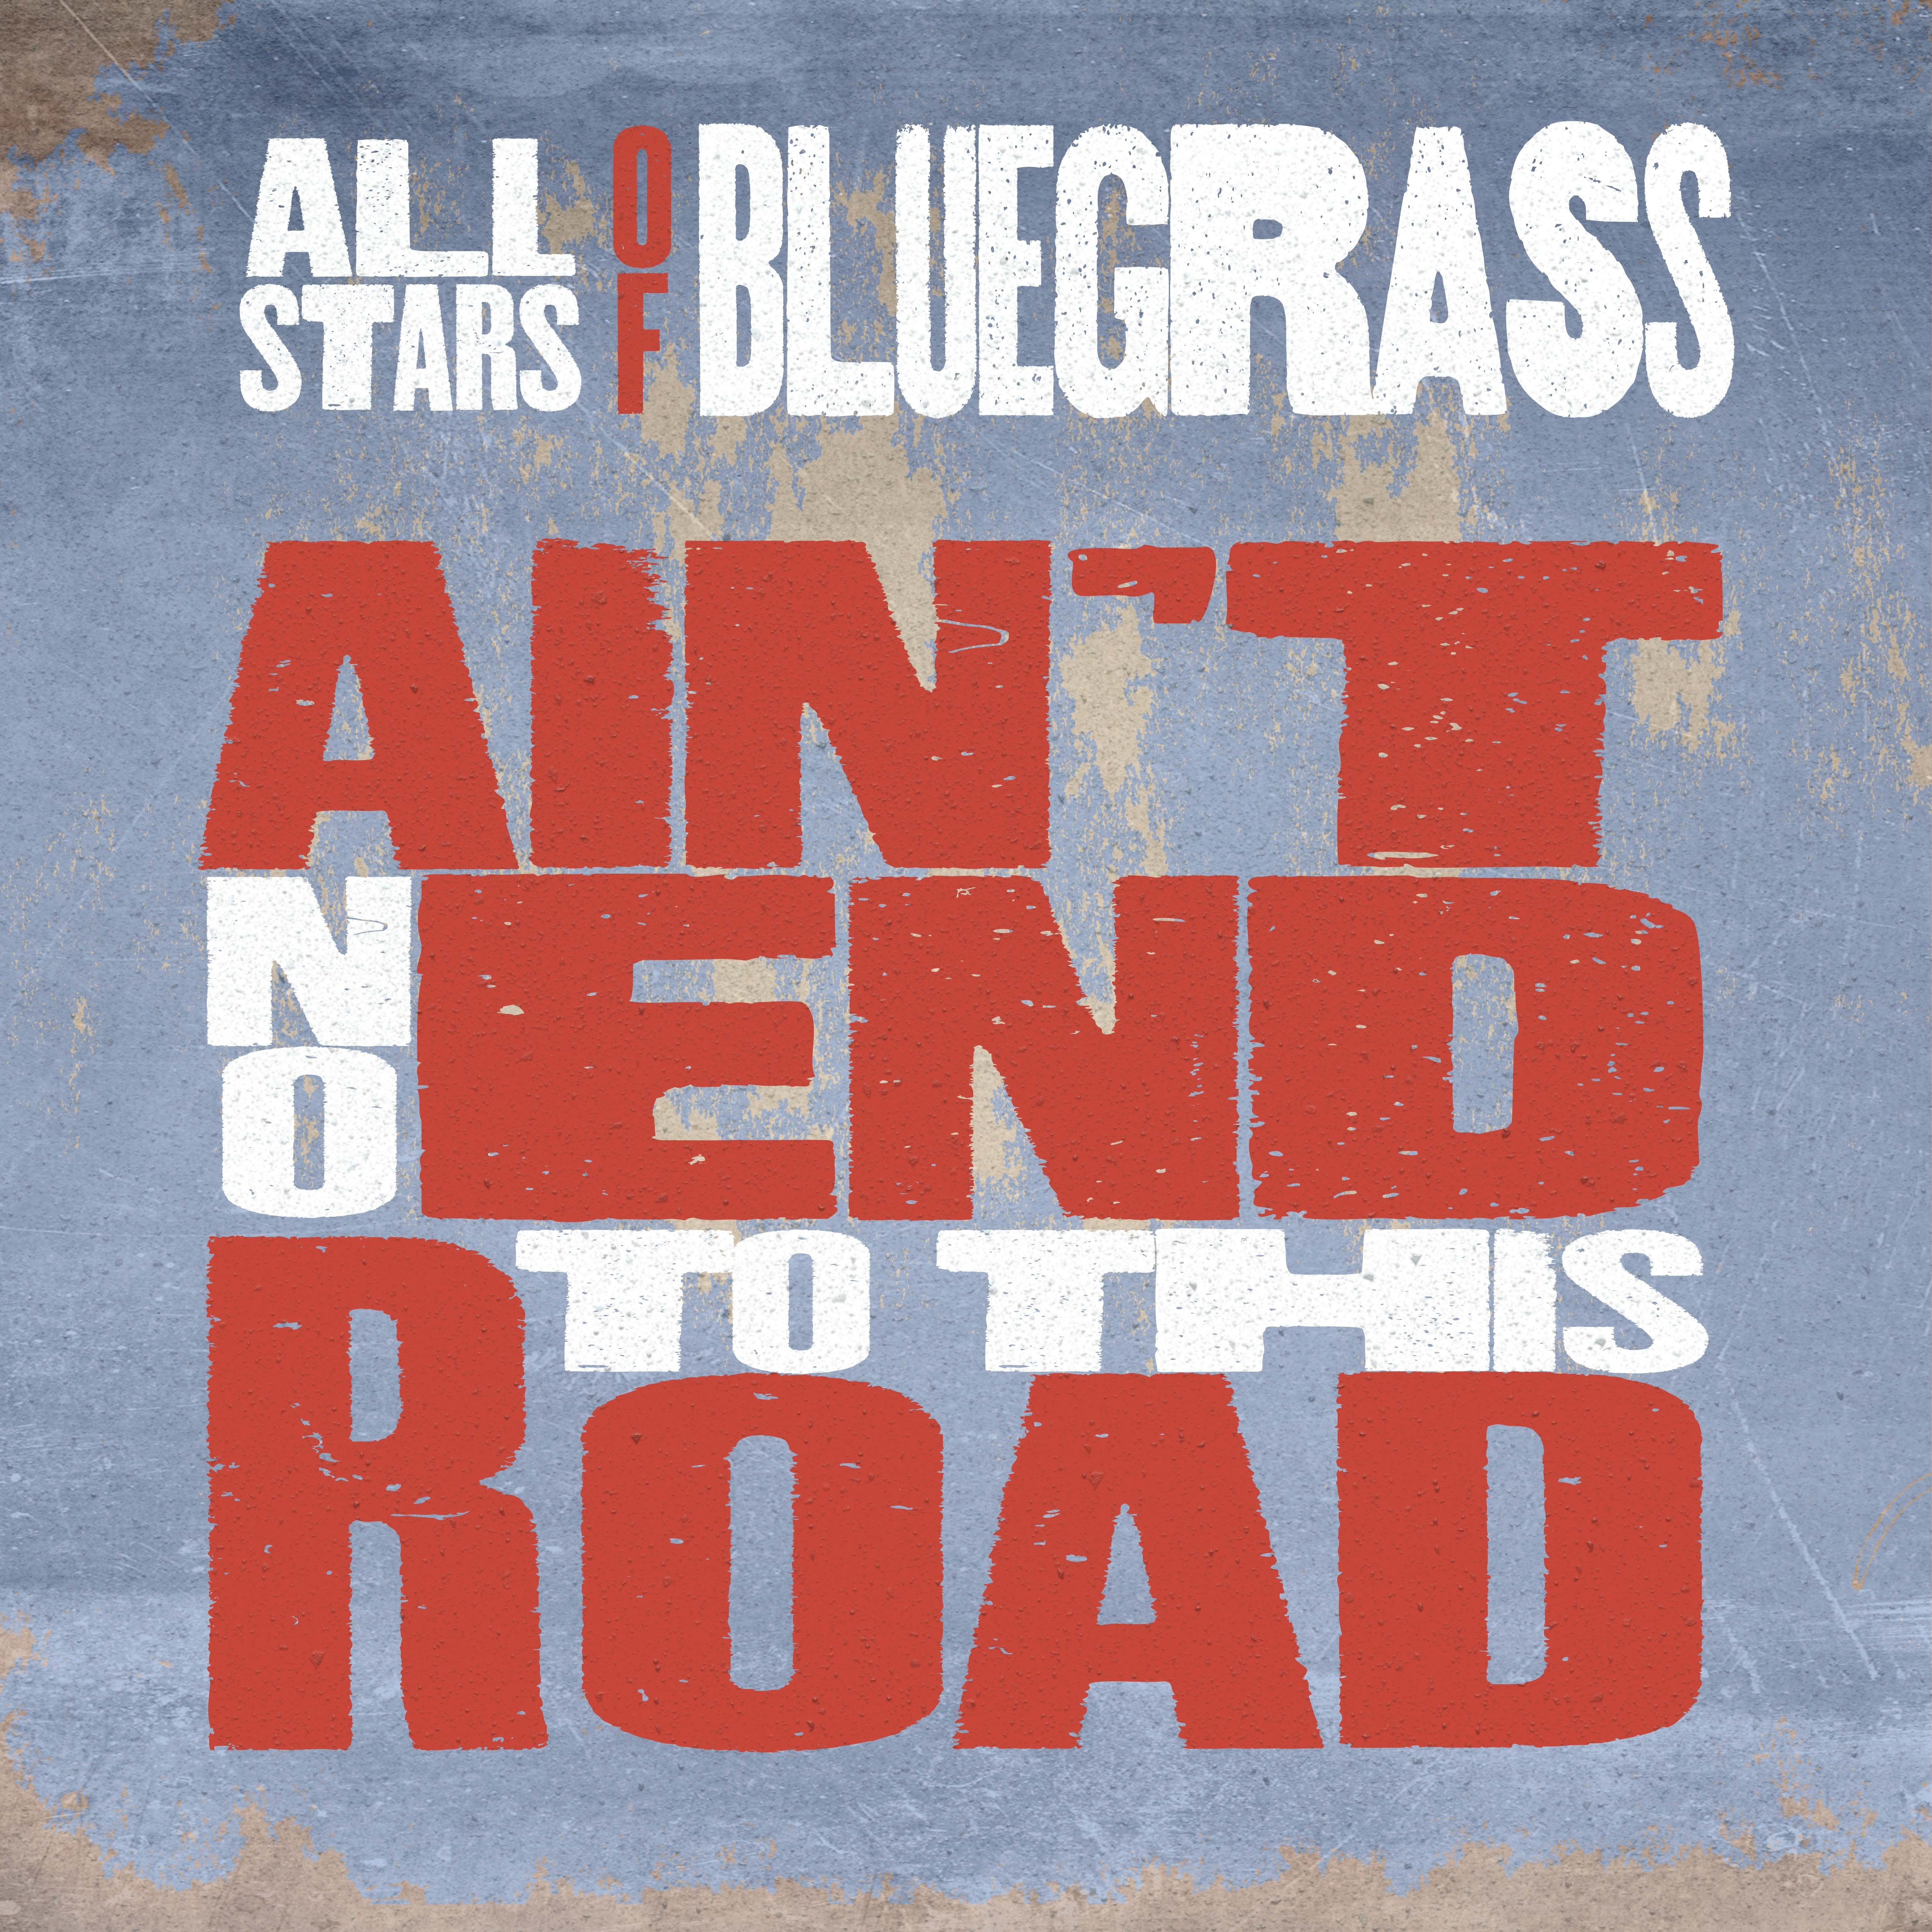 All Stars of Bluegrass Single Cover